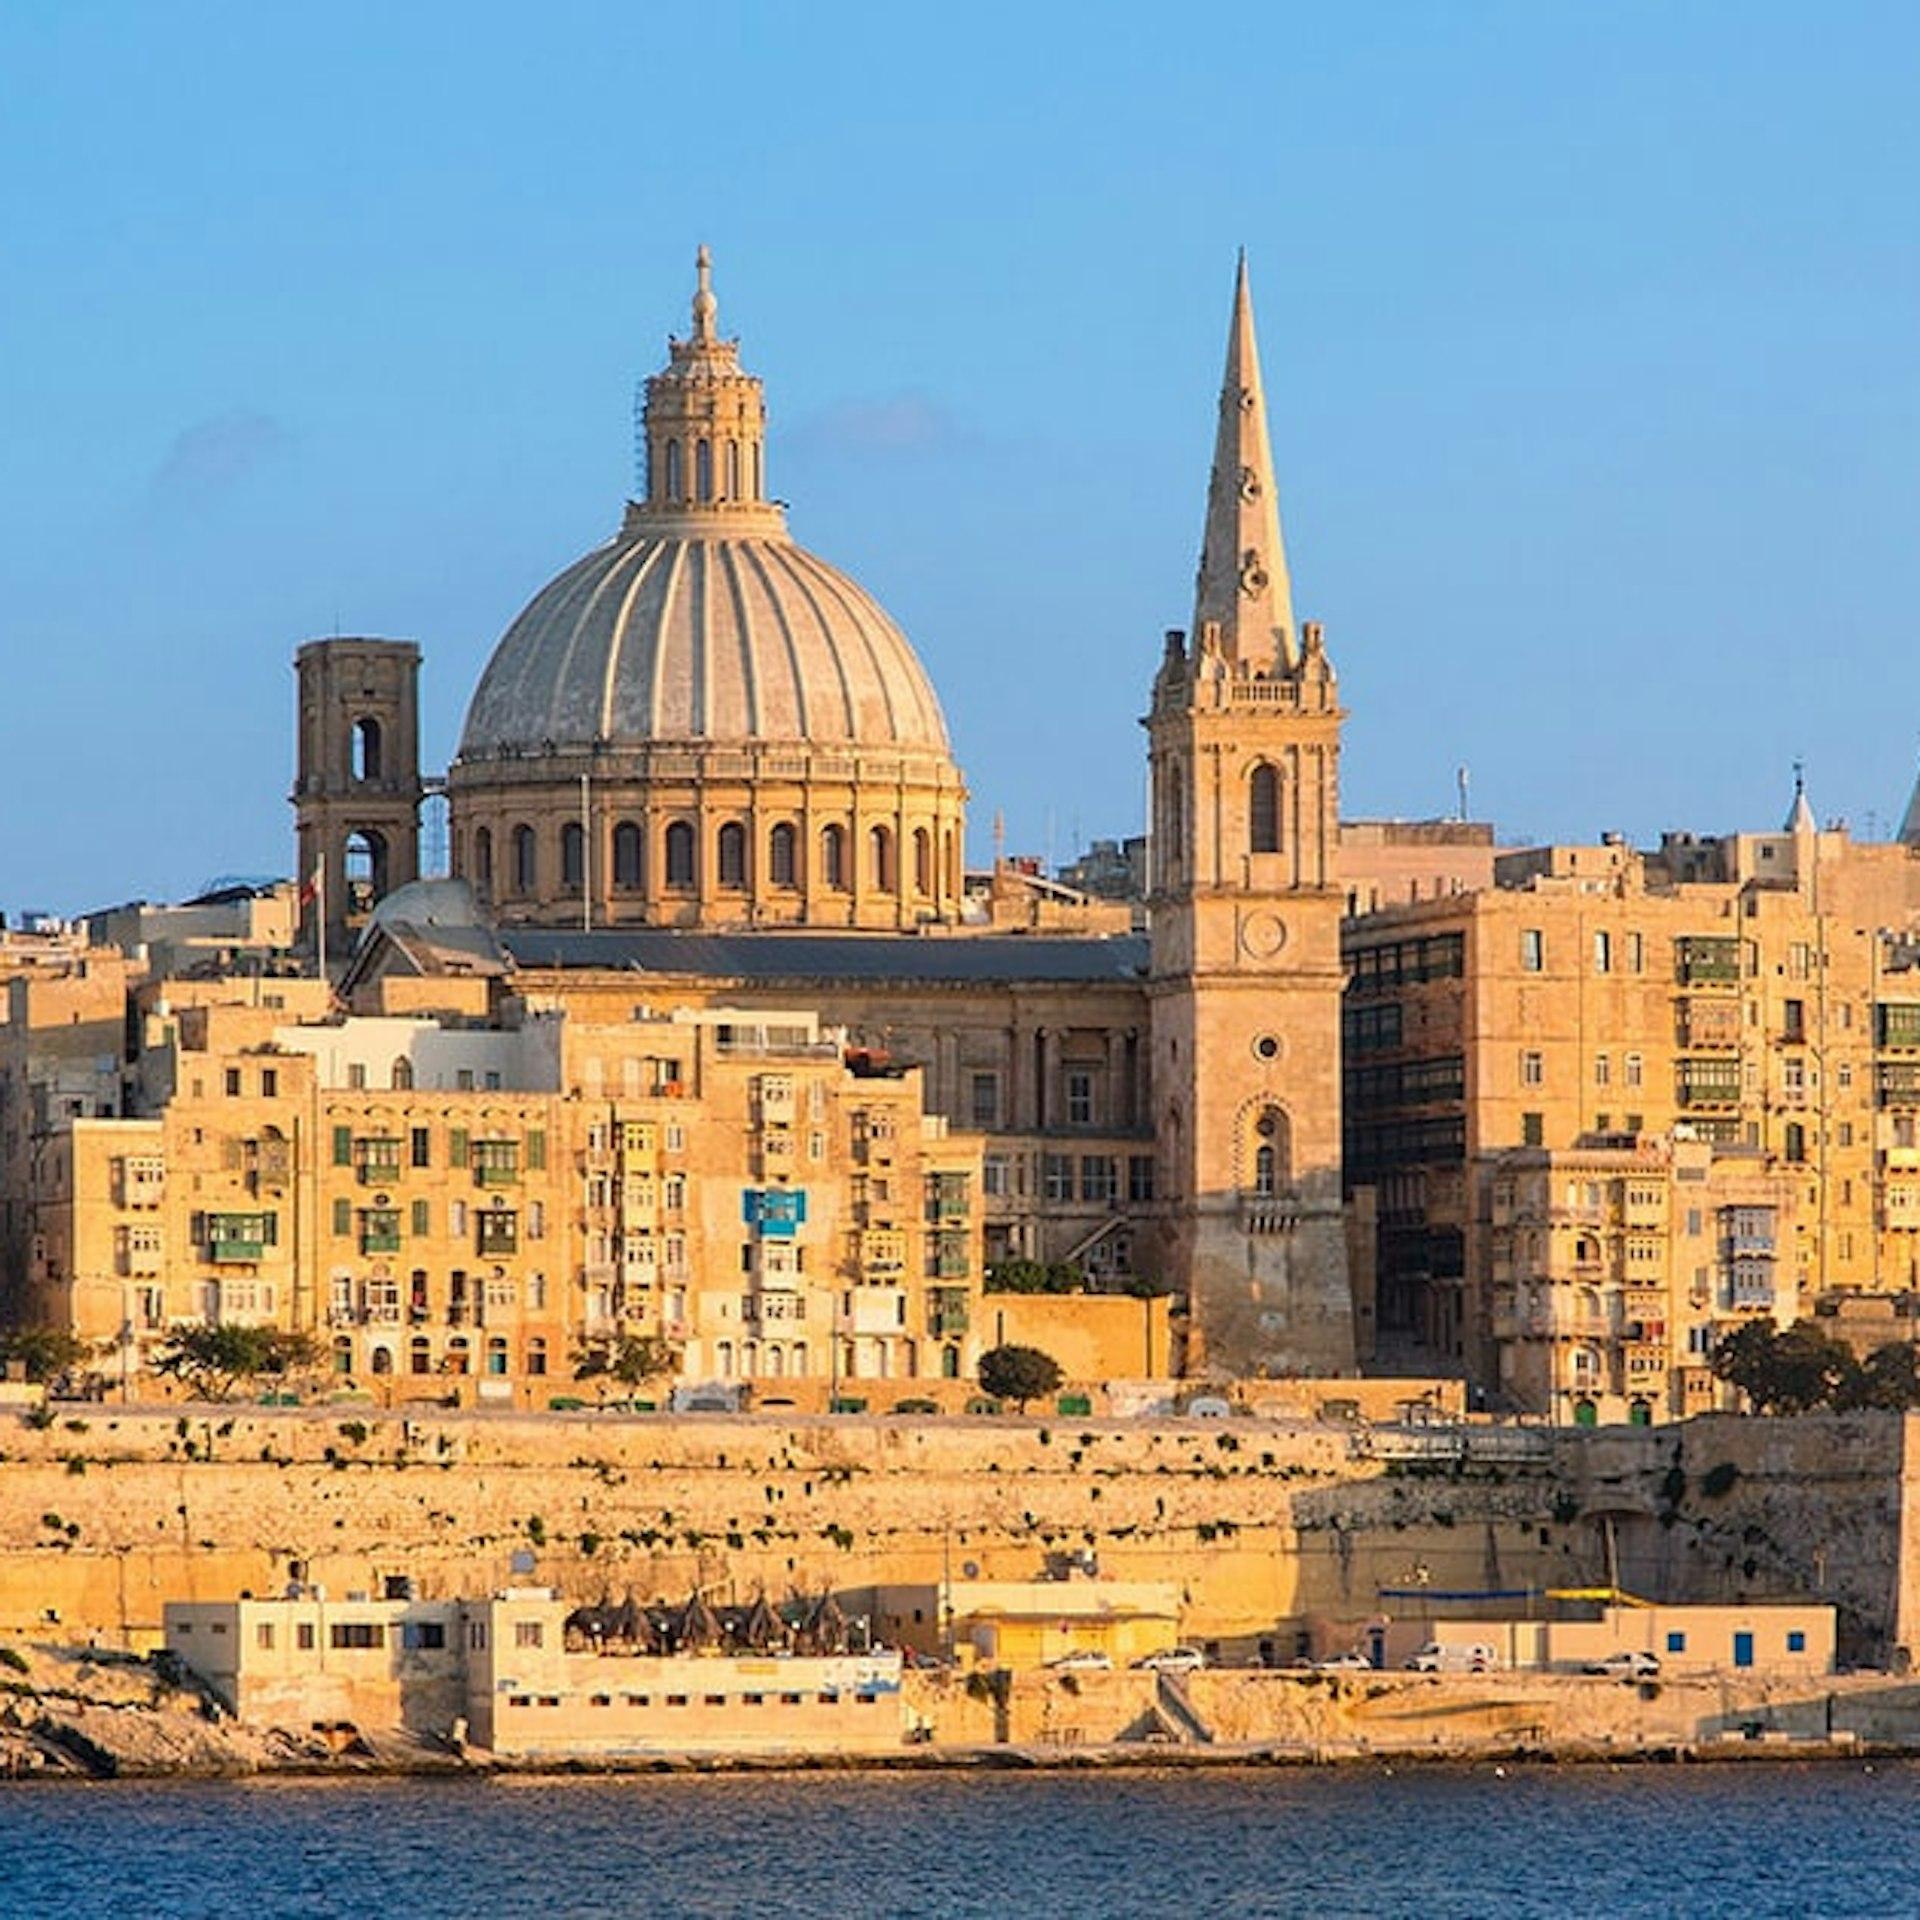 Get the latest news and updates on e-invoicing, e-ordering, e-archiving and indirect tax regulatory requirements for Malta.